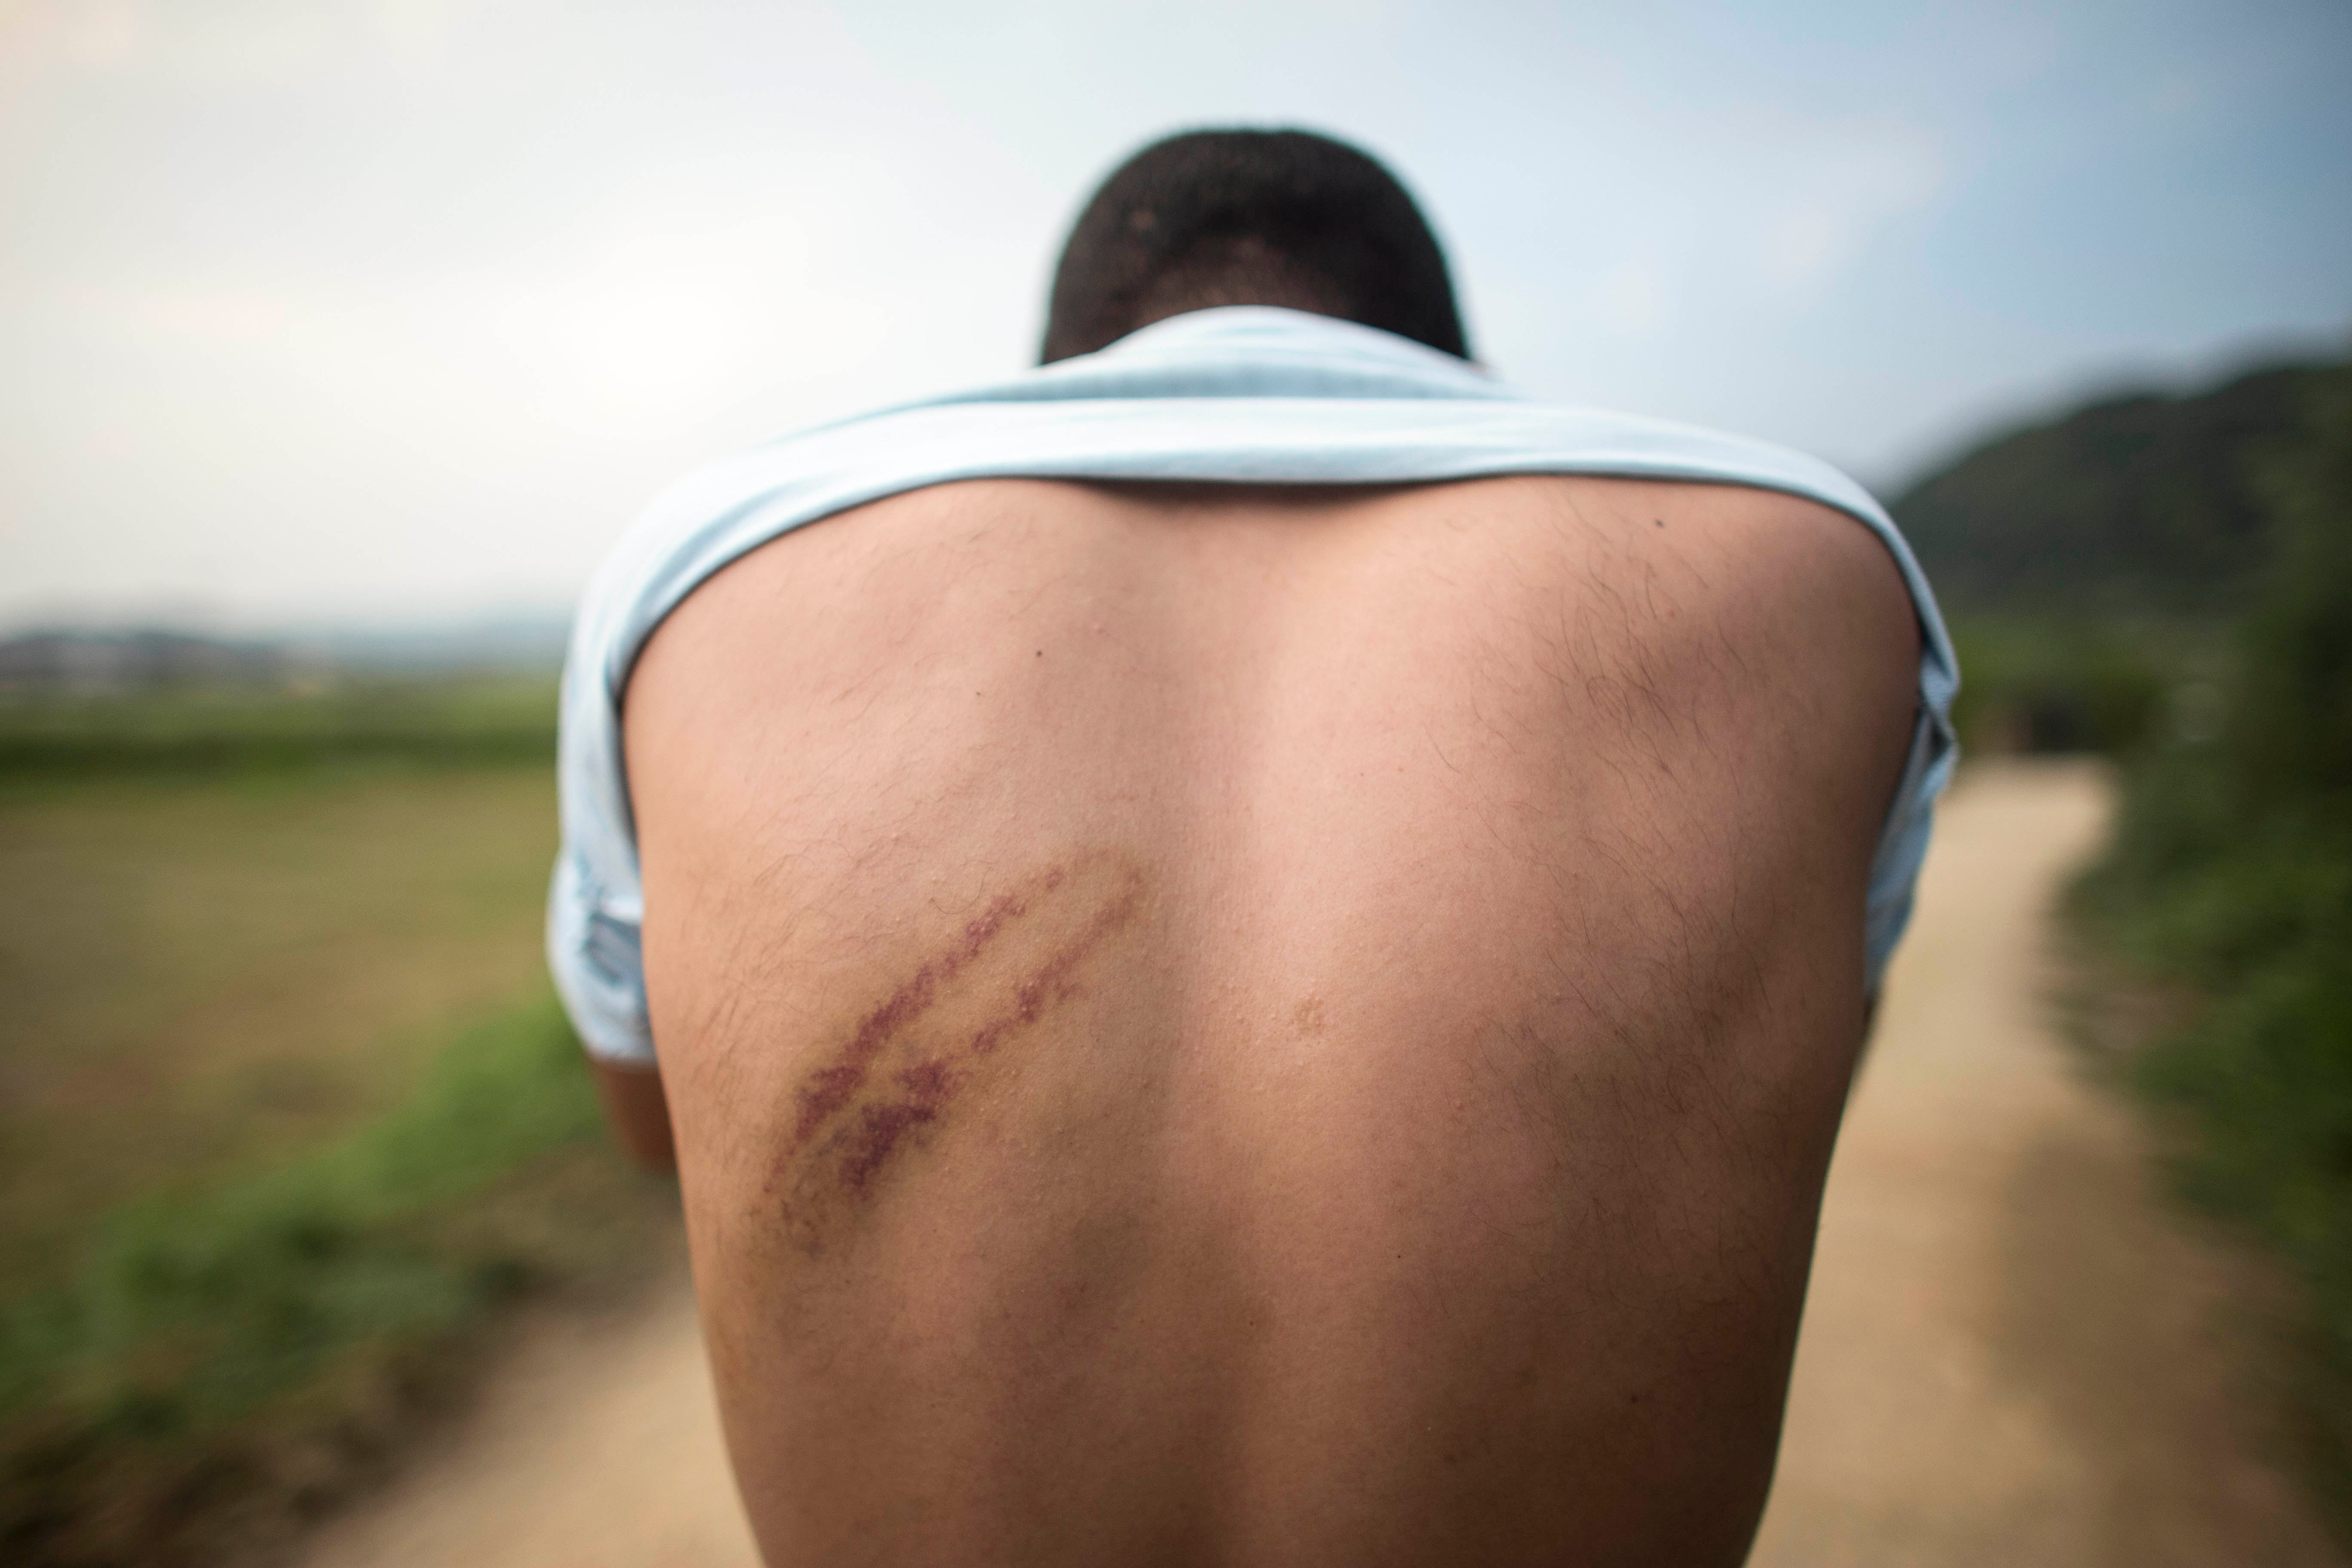 A refugee in Bosnia and Herzegovina shows injuries he says were the result of a beating by Croatian police August 2018.